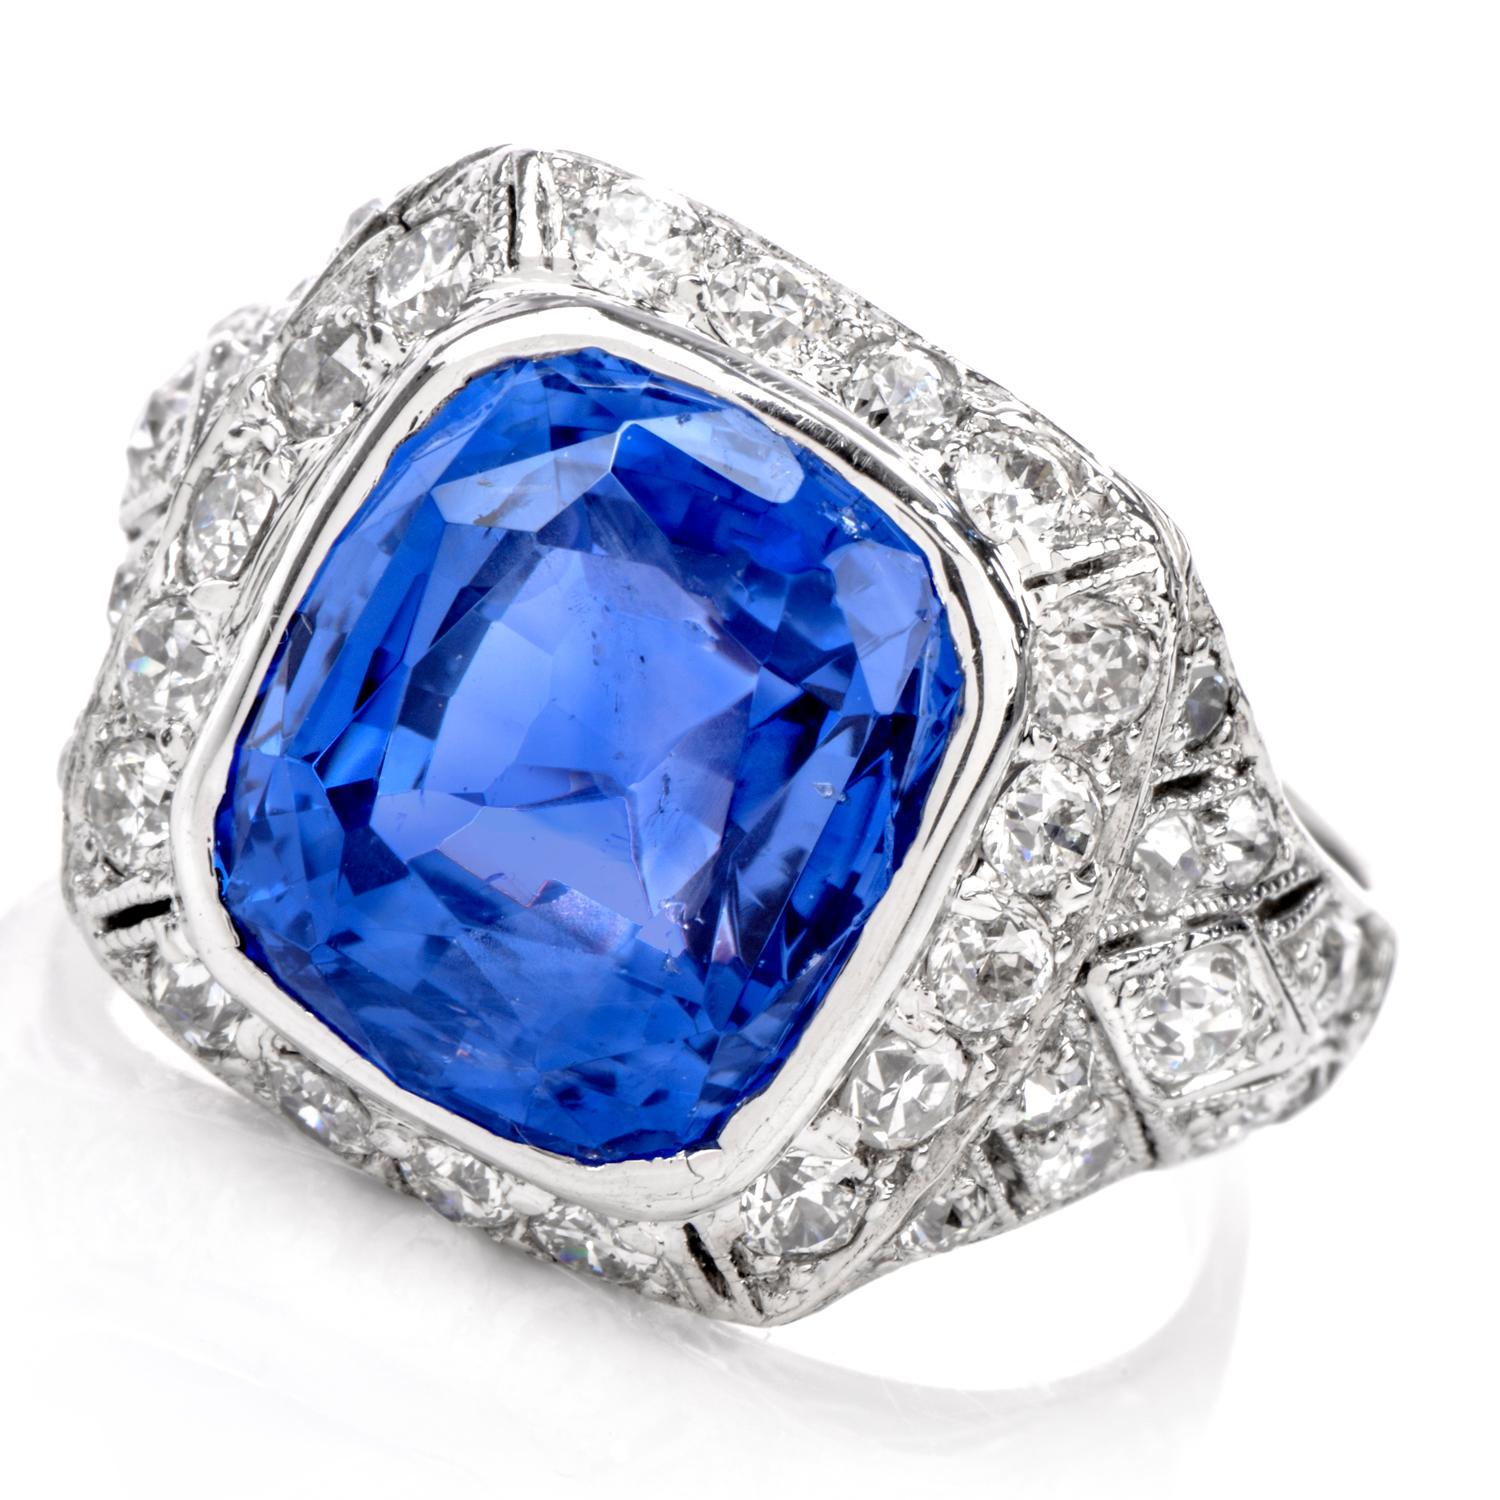 This beautiful vinatge Diamond Sapphire ring was inspired in Art Deco fashion and crafted in luxurious Platinum.

Ideally centered, this ring is adorned with a Royal Blue Color; 10.58 carats Natural NO Heat Ceylon Sapphire, No treatments

measuring